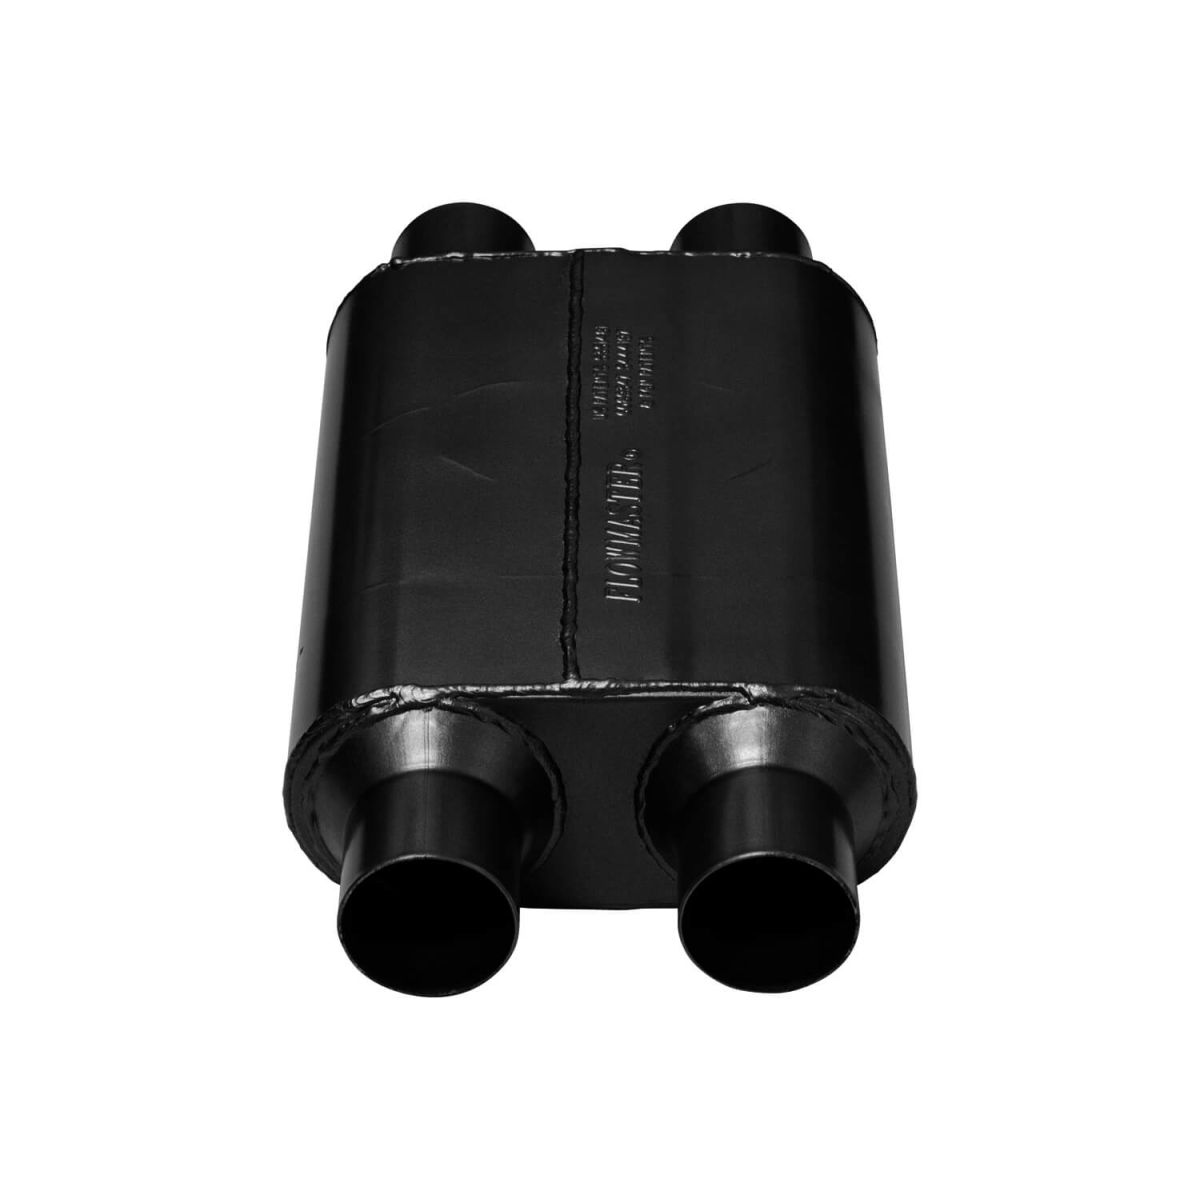 Flowmaster - Flowmaster 40 Series 2.5" Dual In 2.5" Dual Out Aggressive Chambered Muffler